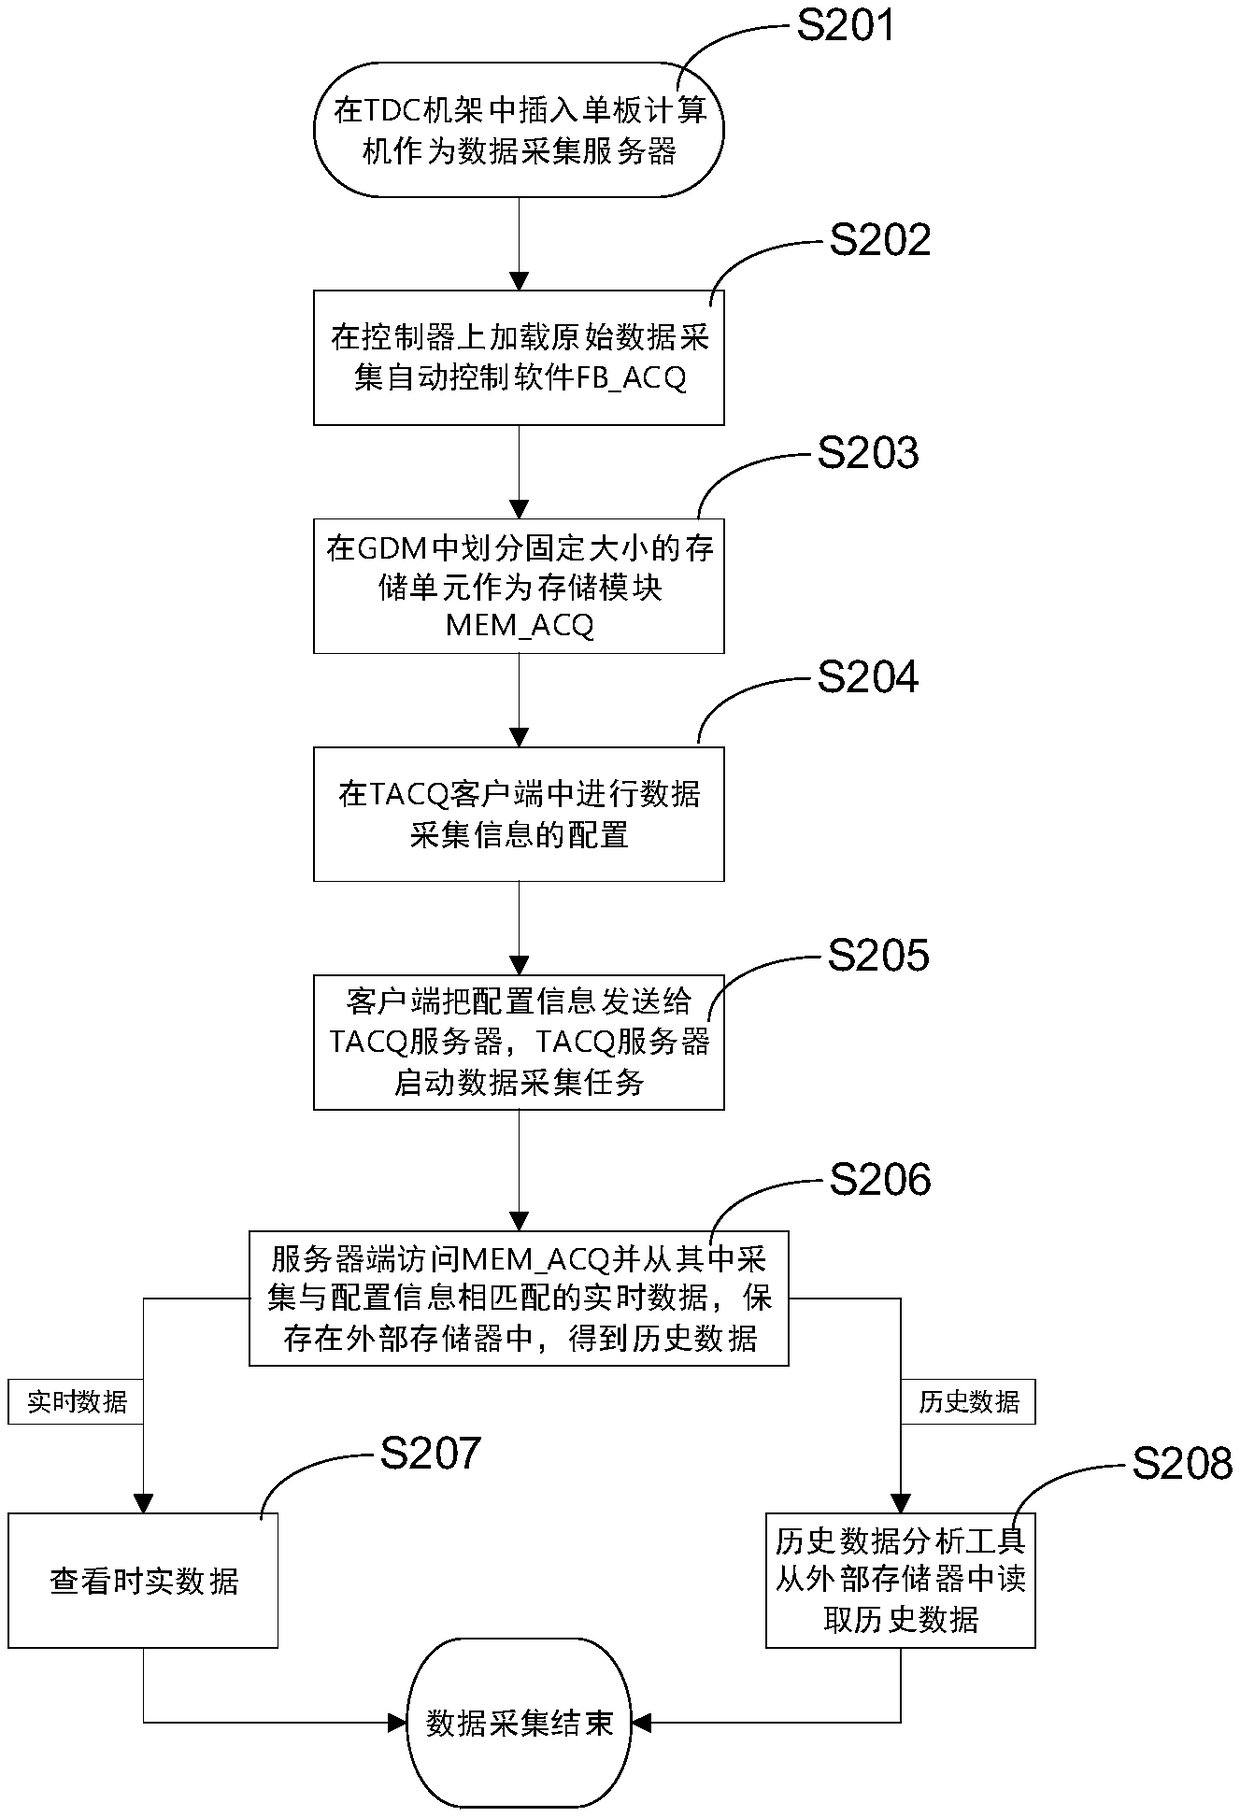 Embedded data acquisition system and method for GDM networks of SIMATIC TDC systems